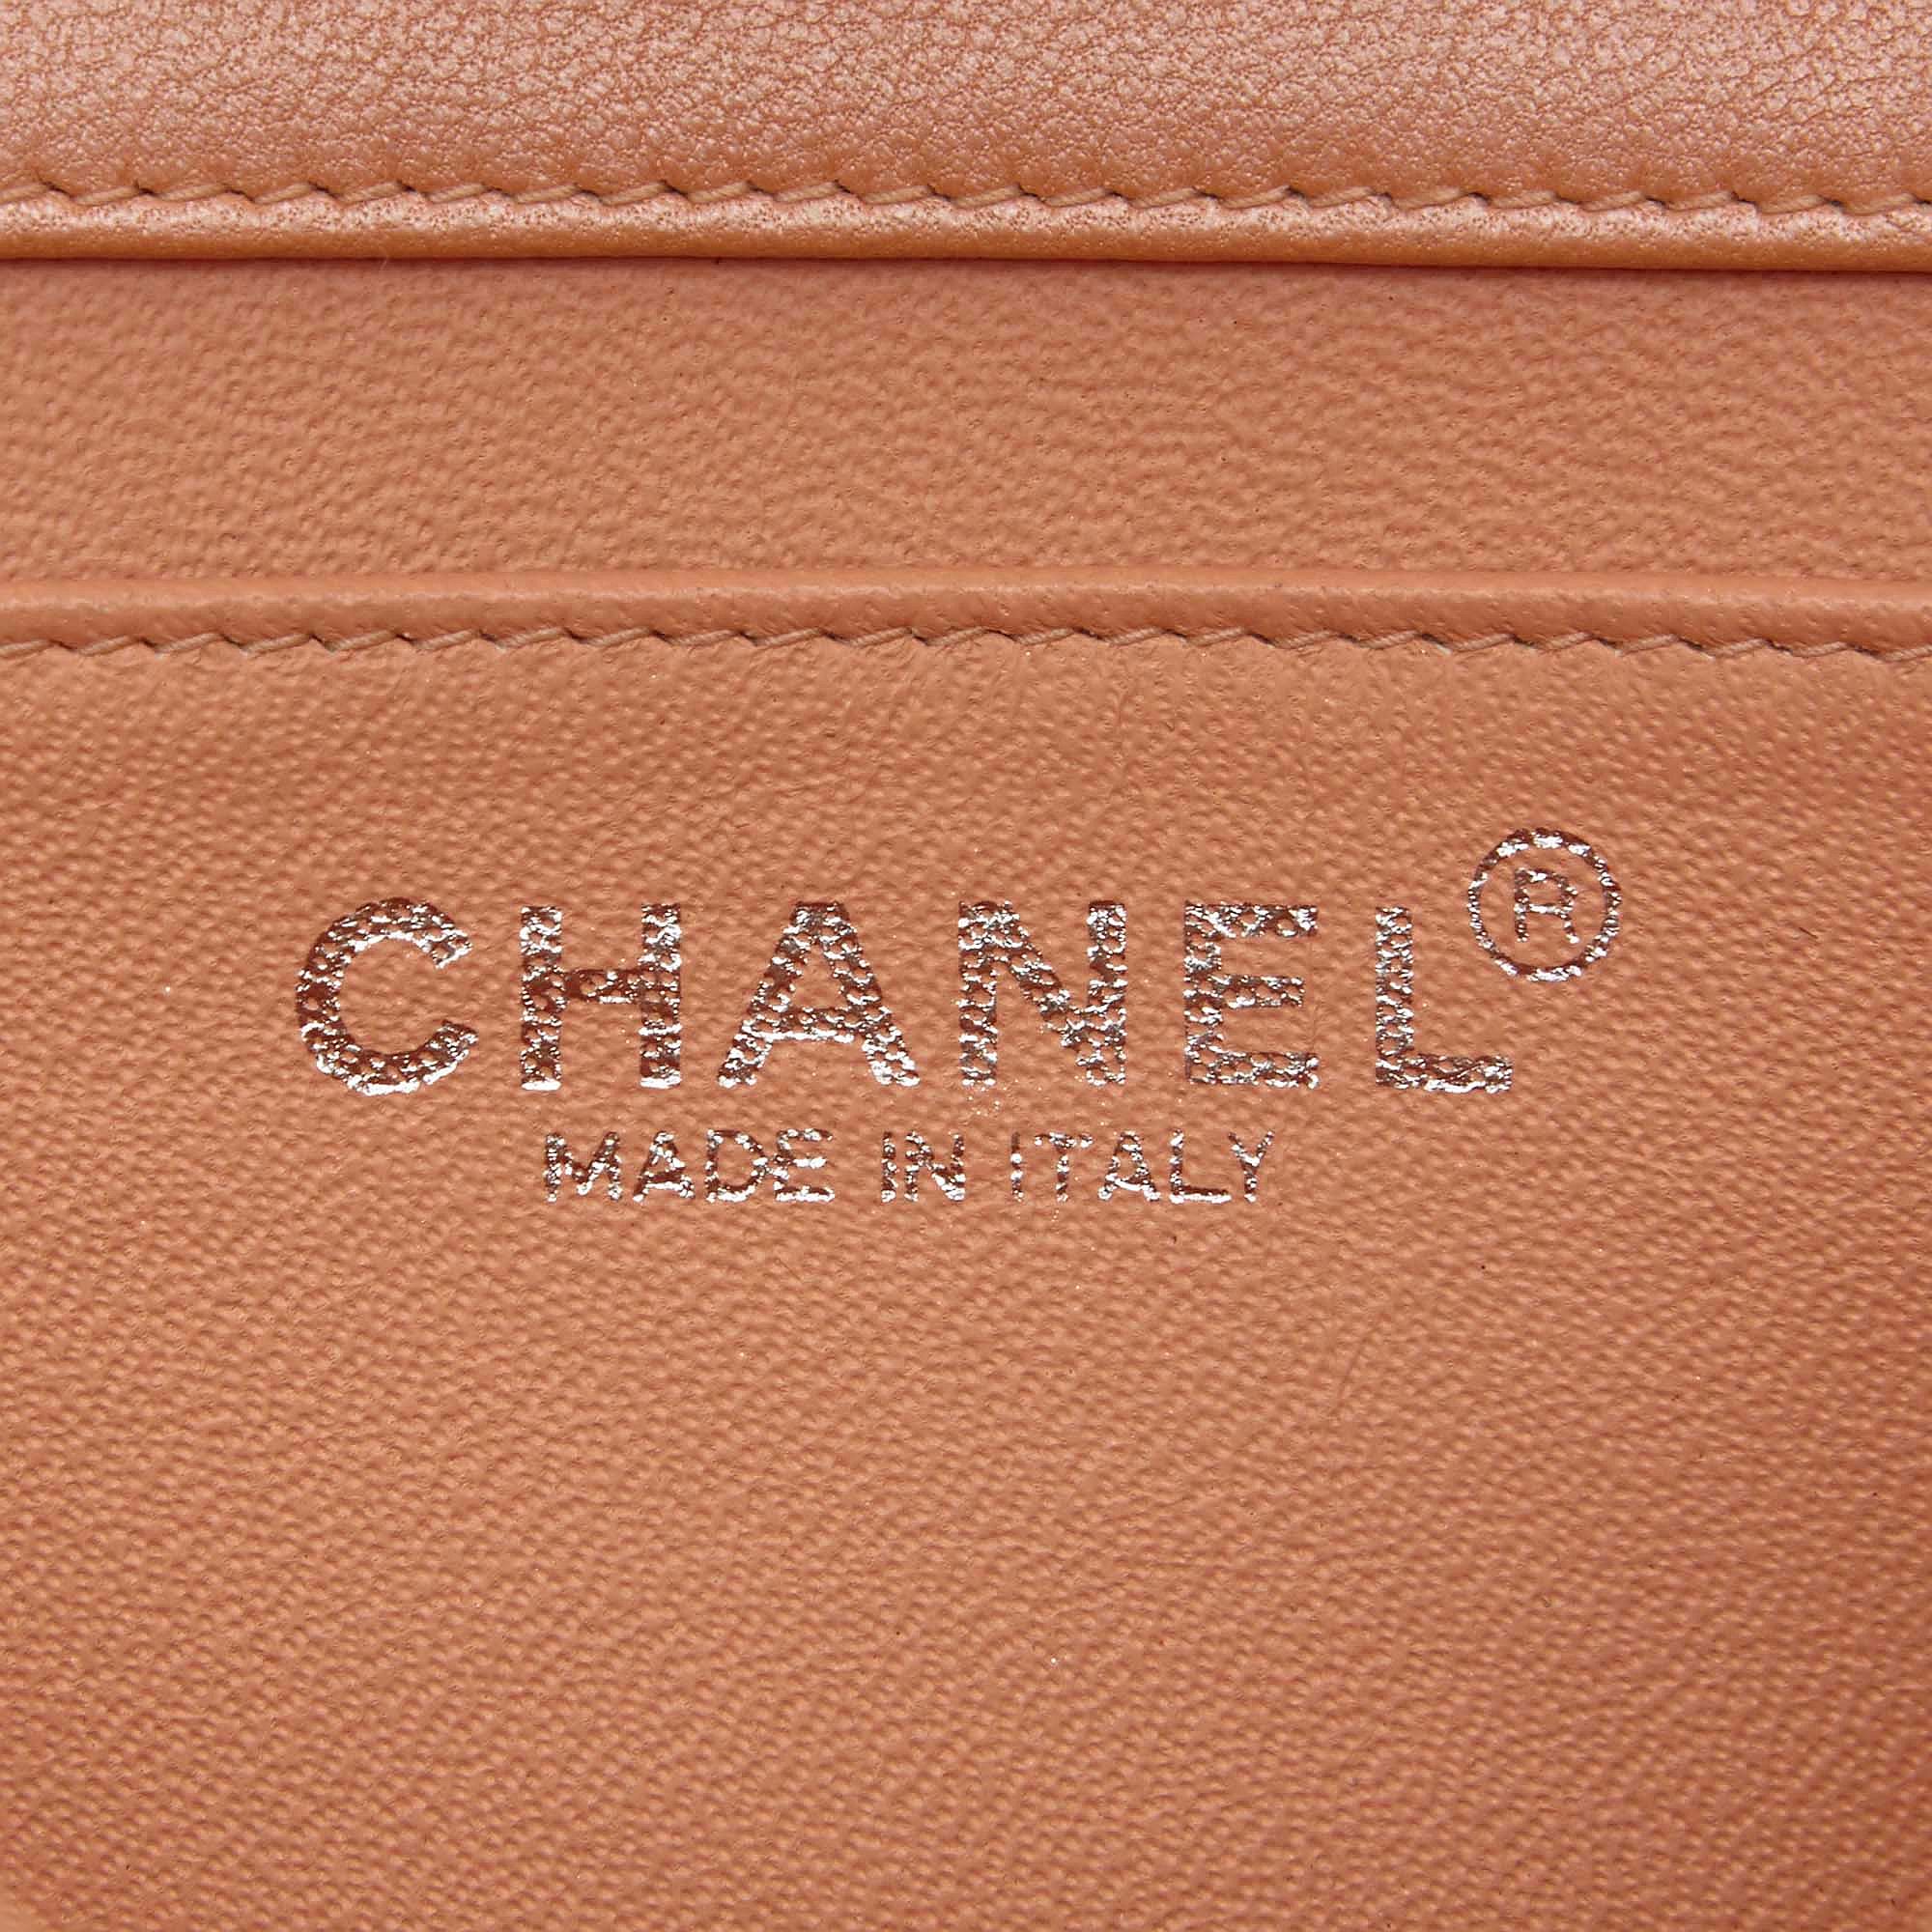 CHANEL PALE METALLIC PINK SMALL SINGLE FLAP HANDBAG, date code for 2000-02, quilted leather with - Image 11 of 16